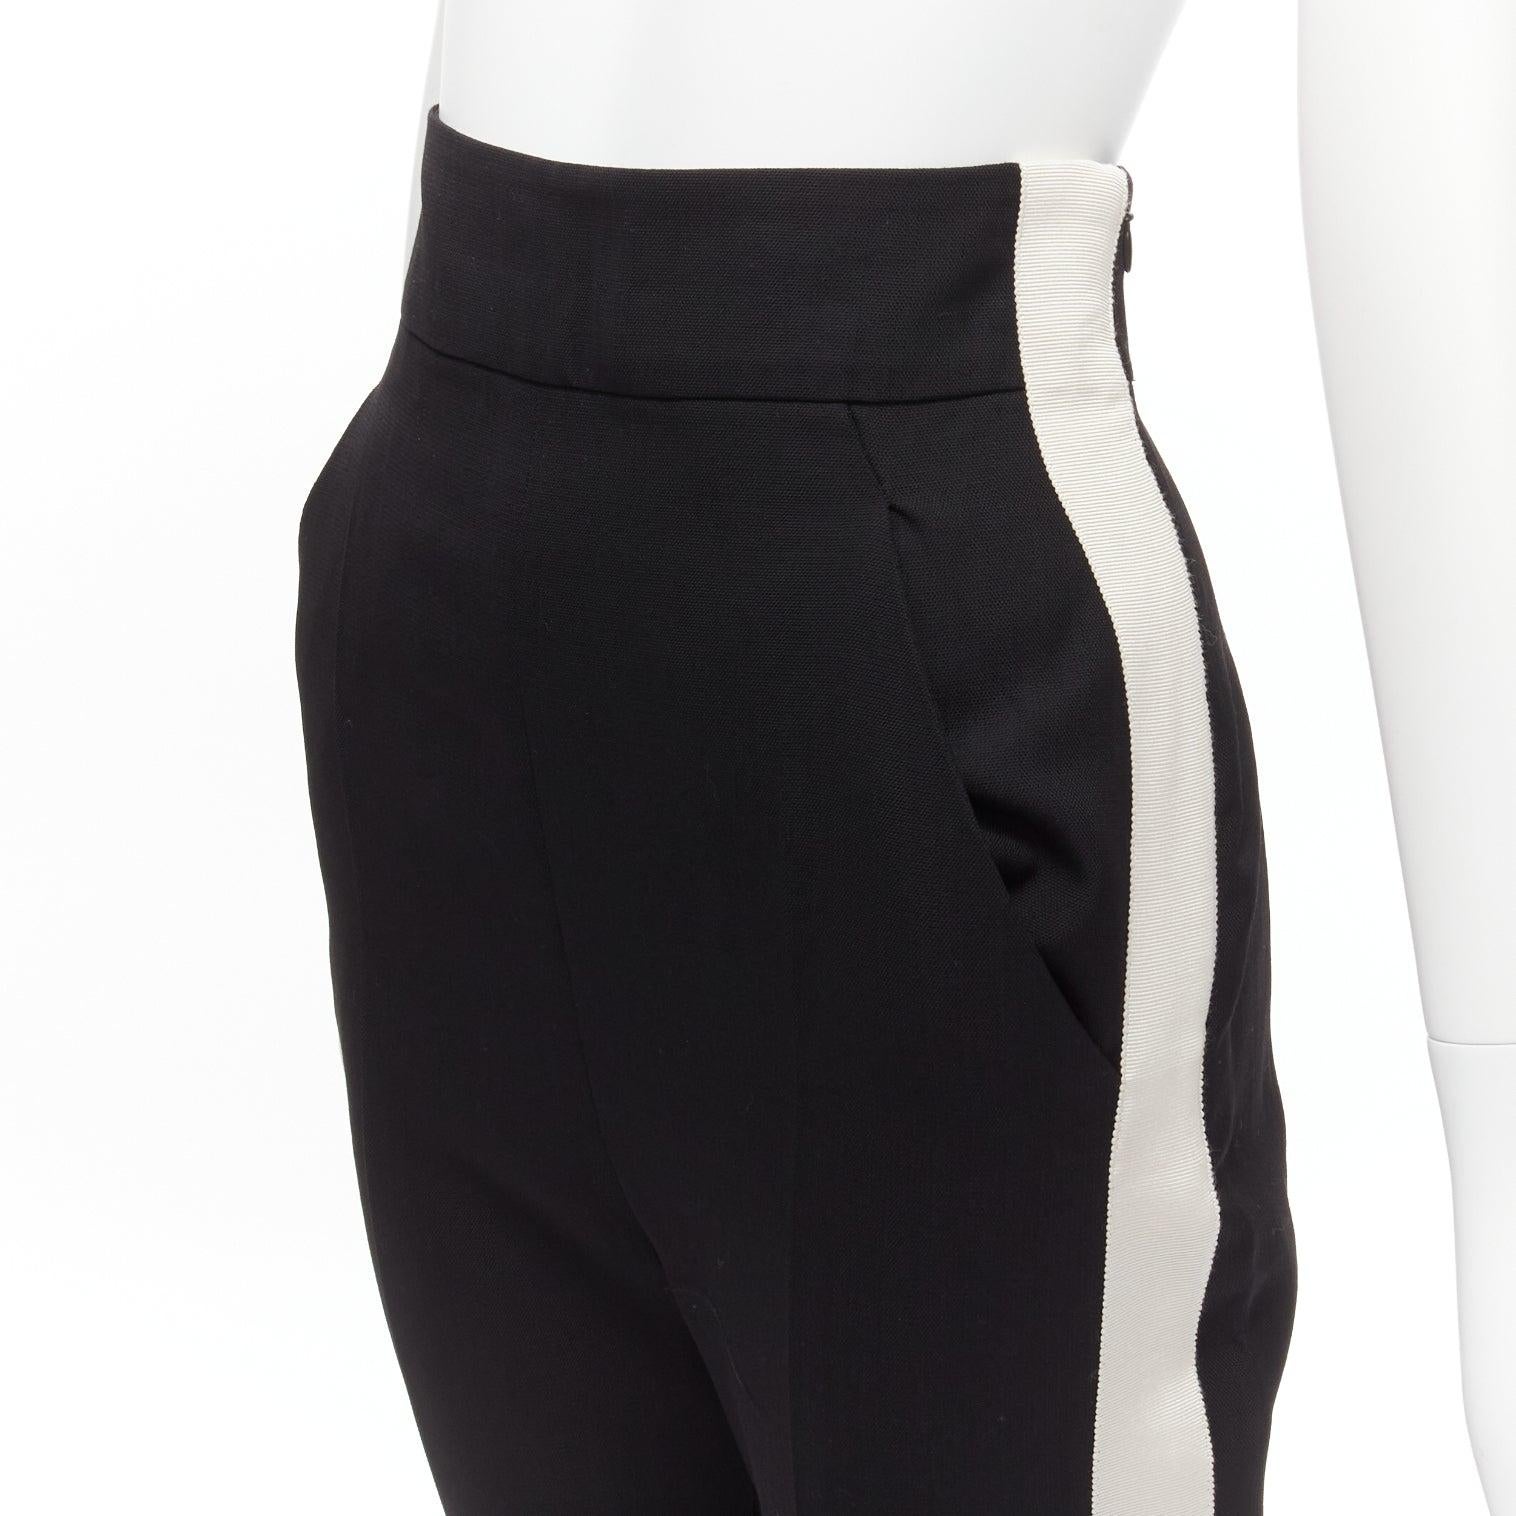 HAIDER ACKERMANN 100% fleece wool black white side tape high waist tapered pants FR36 S
Reference: SNKO/A00327
Brand: Haider Ackermann
Designer: Haider Ackermann
Material: Wool
Color: Black, White
Pattern: Solid
Closure: Zip
Lining: Black